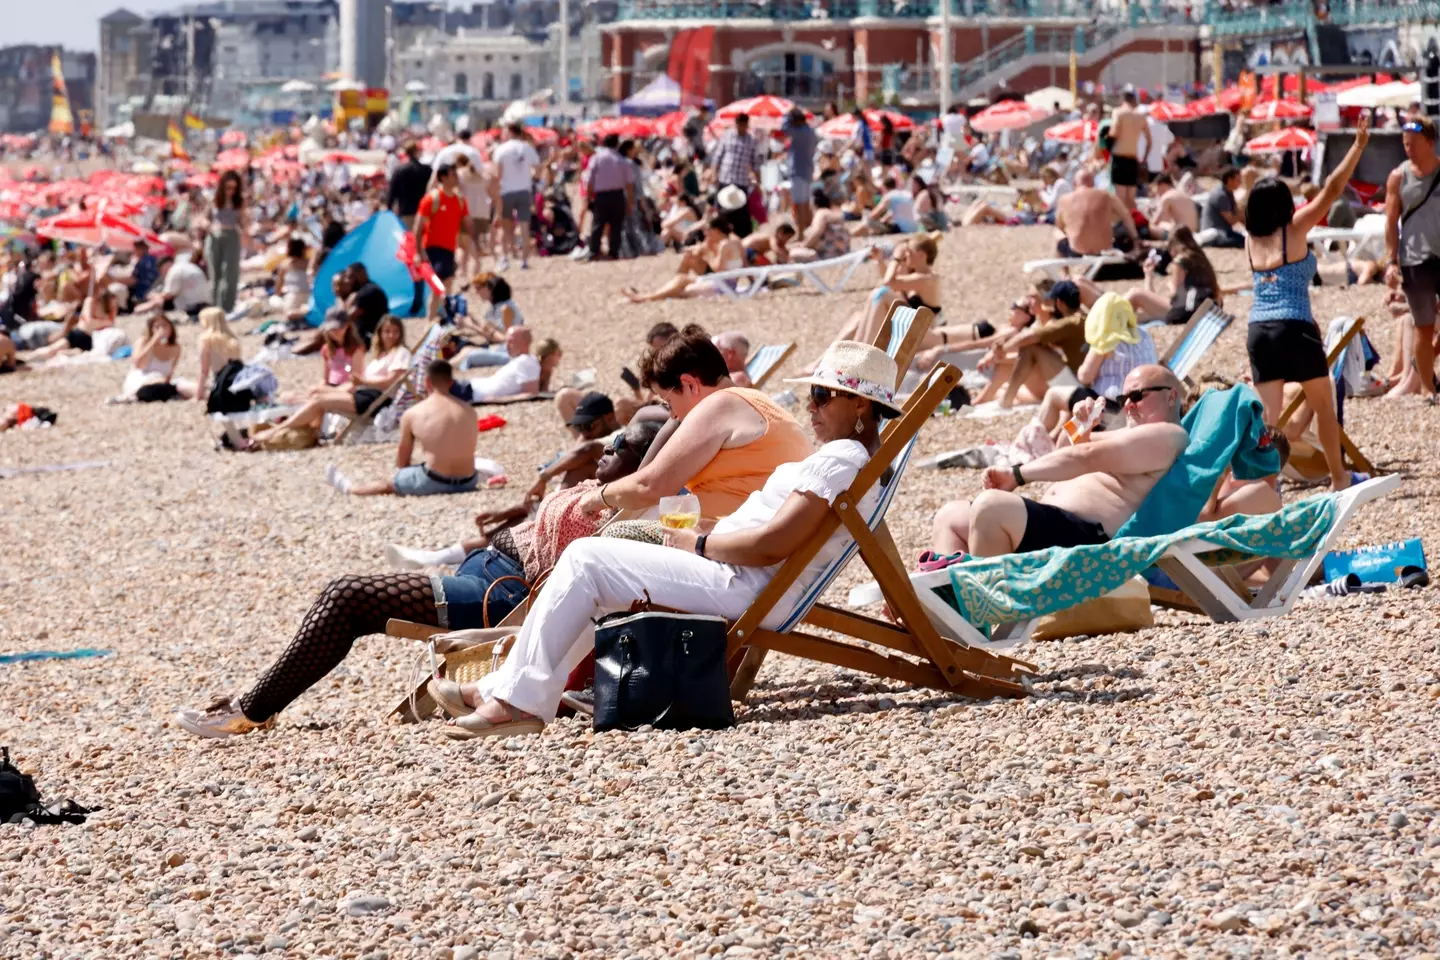 The UK could see record temperatures over the coming days.